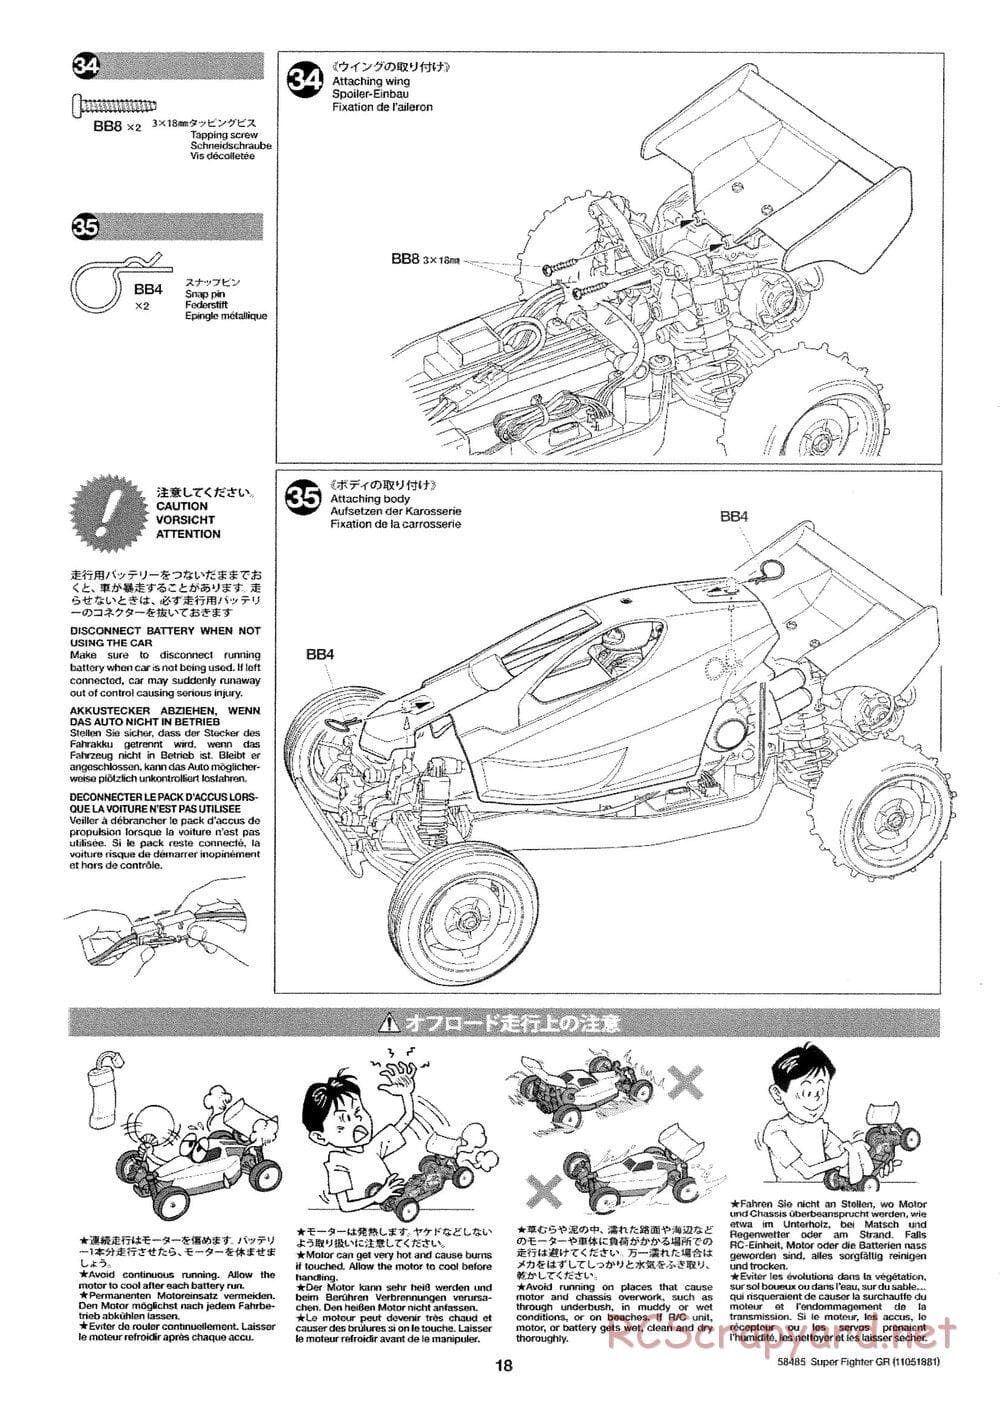 Tamiya - Super Fighter GR - DT-02 Chassis - Manual - Page 18